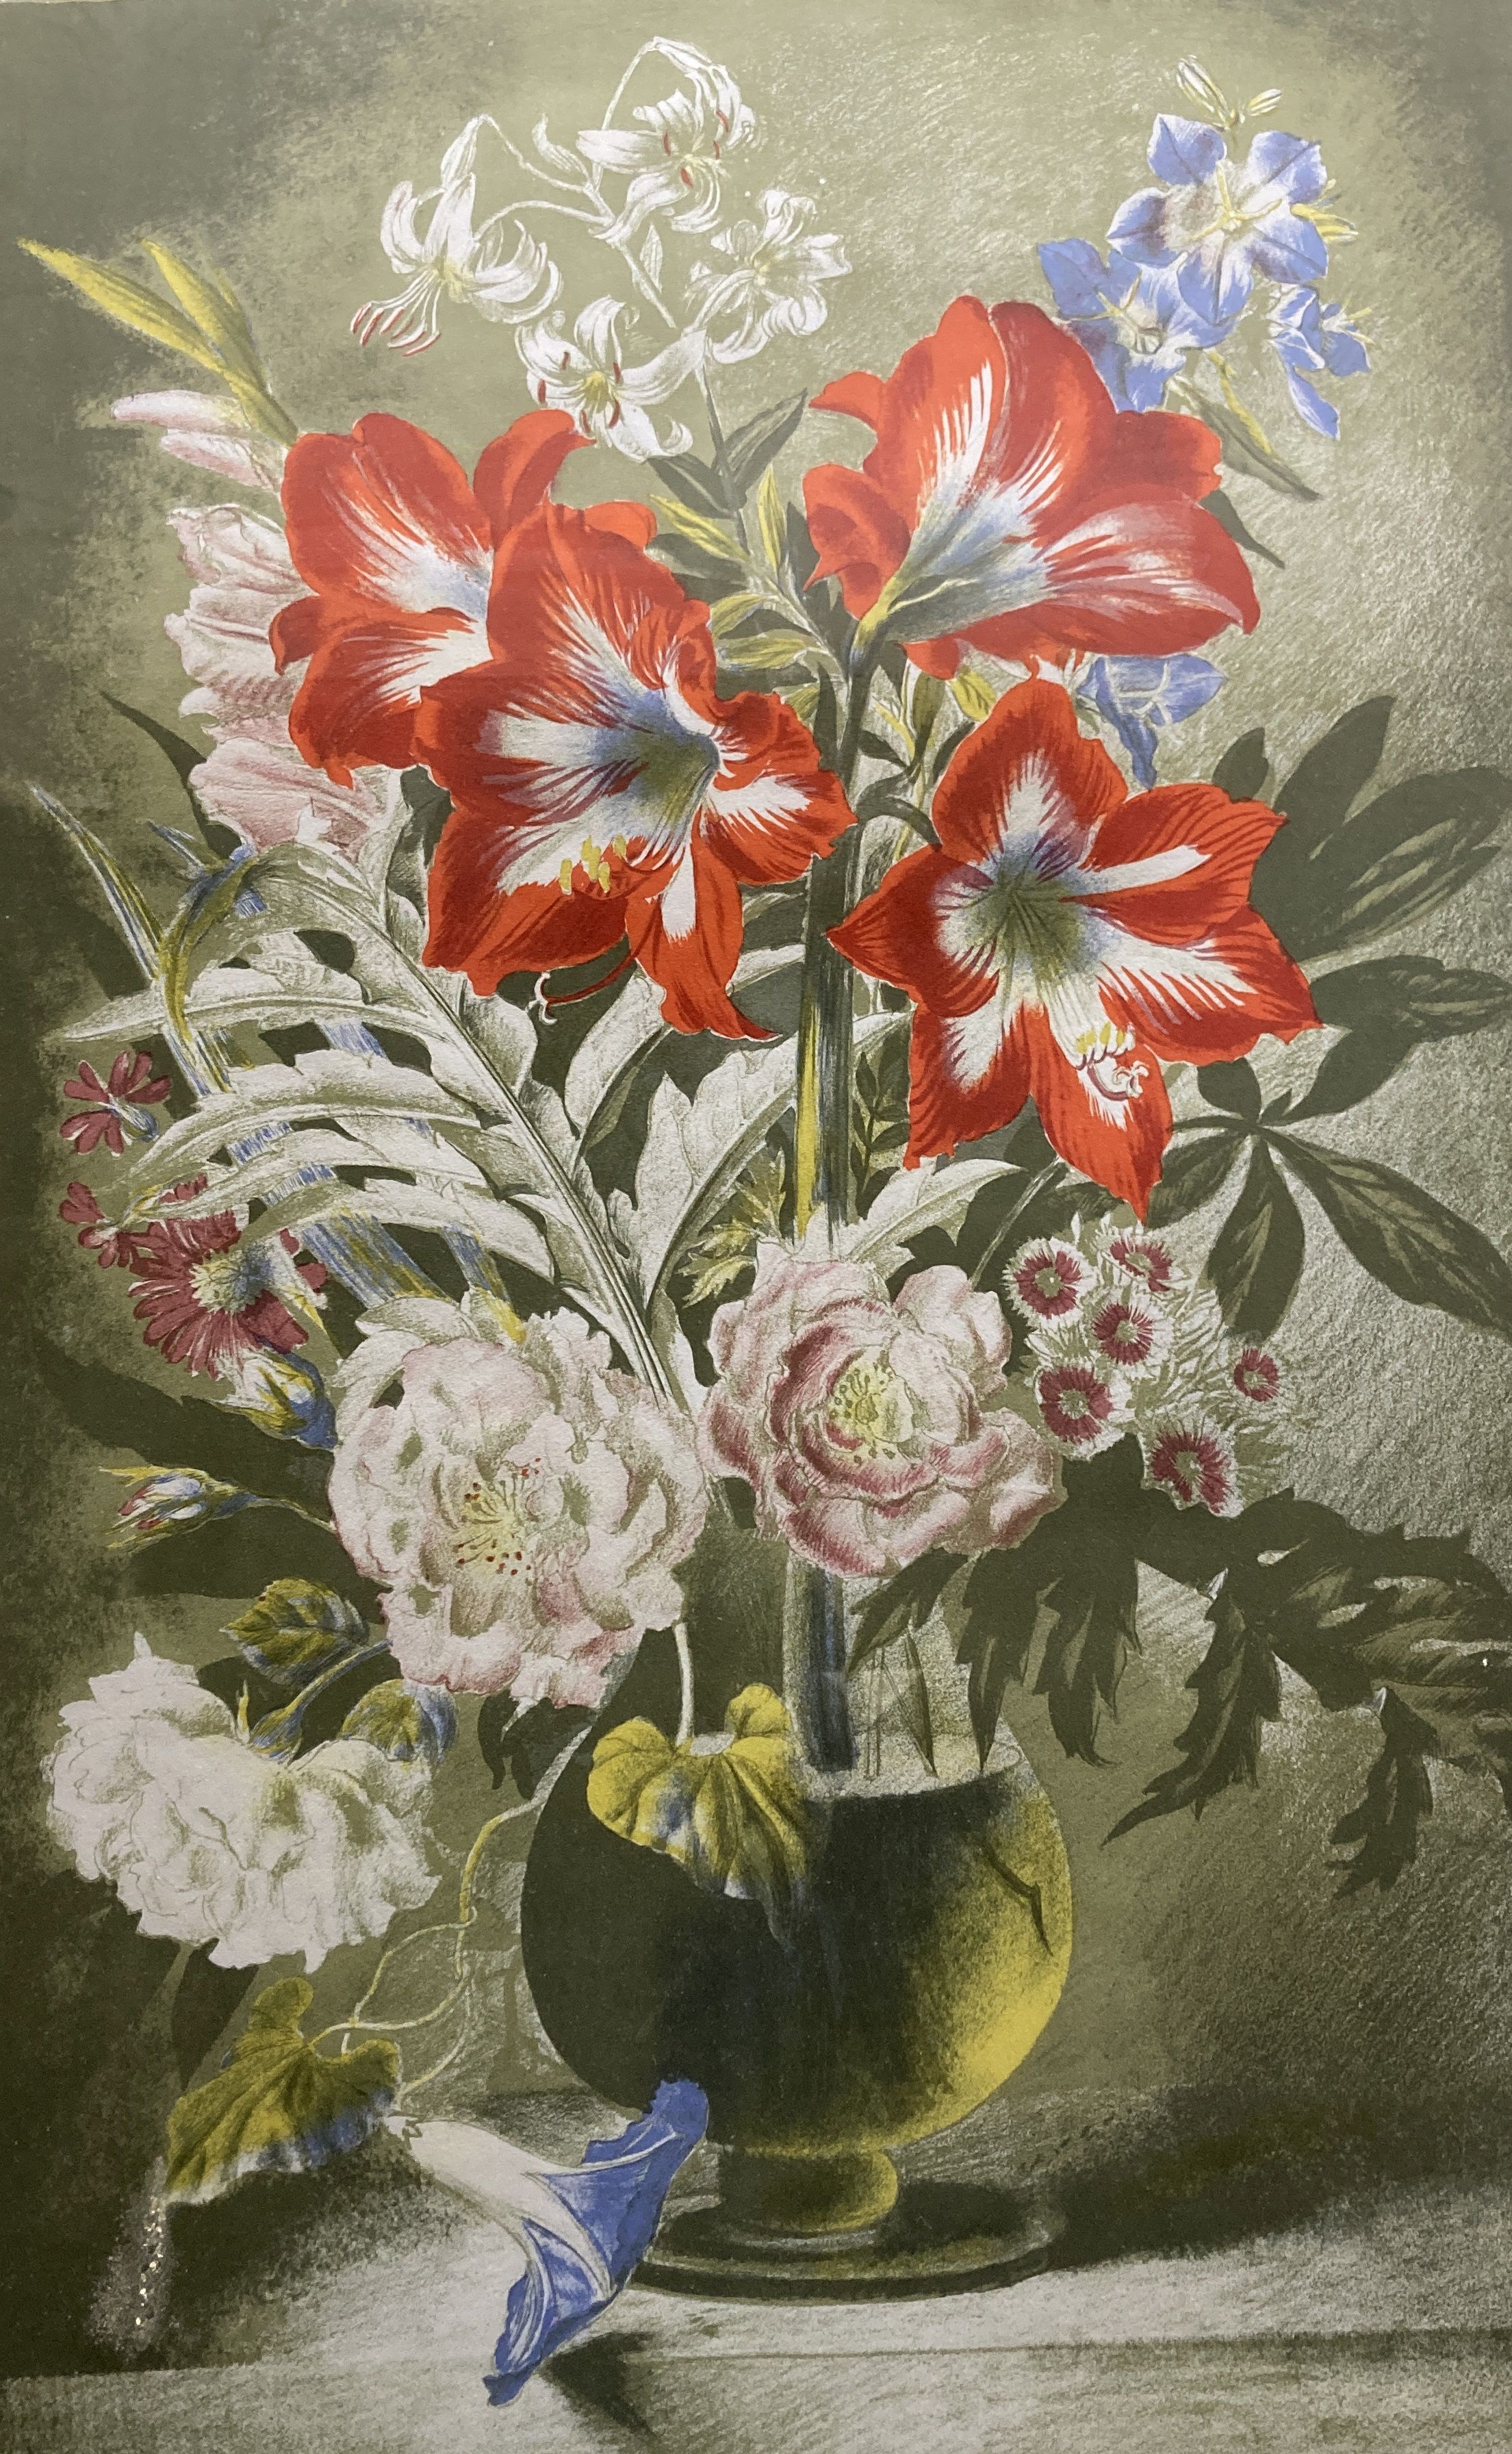 Gerald Cooper, Print for Schools, 'Striped Lily' (SP.12), 71.5 x 49cm